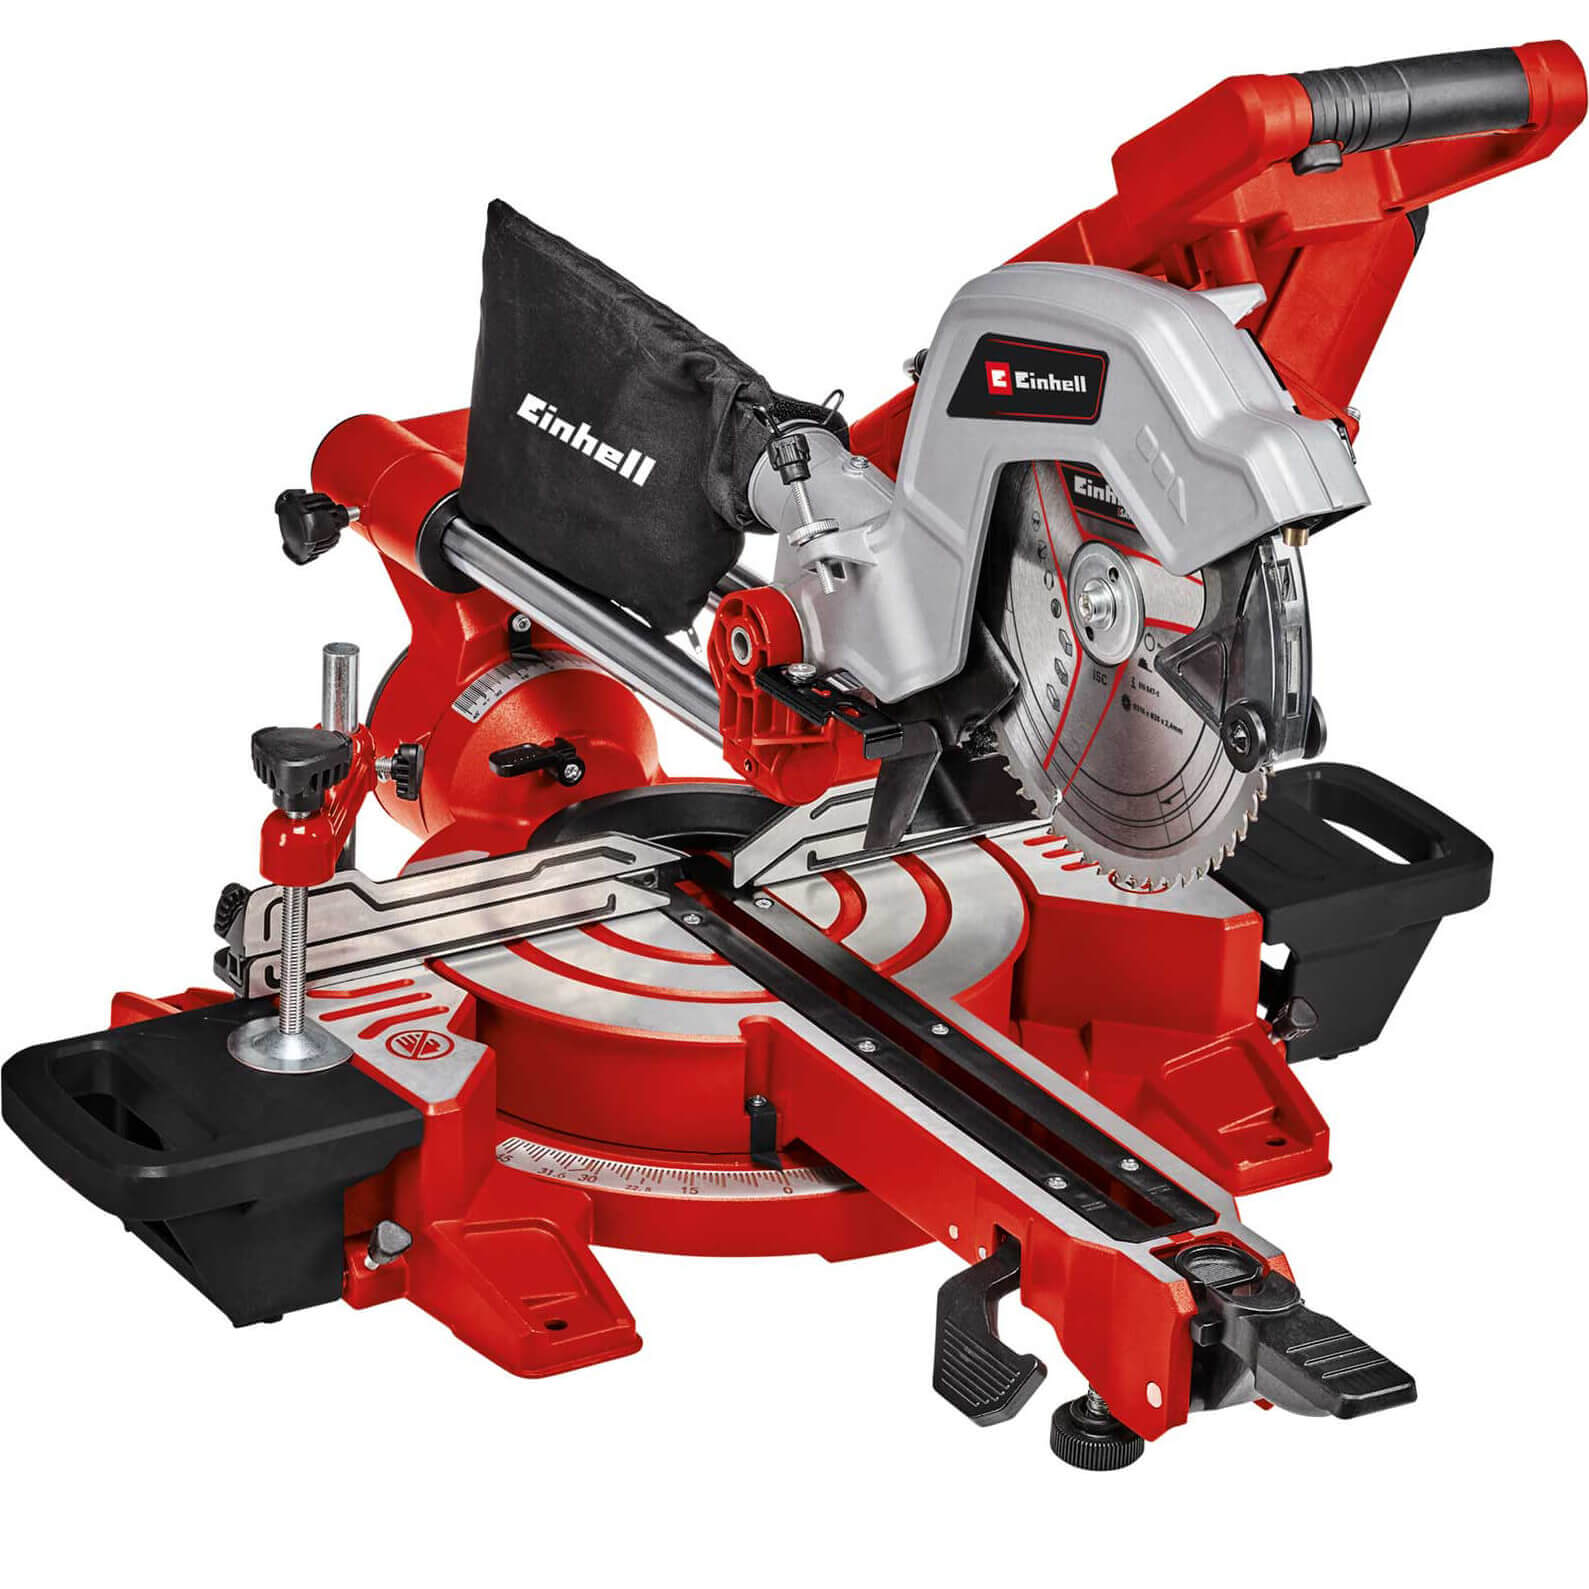 Image of Einhell TE-SM 216 Double Bevel Sliding Mitre Saw 216mm